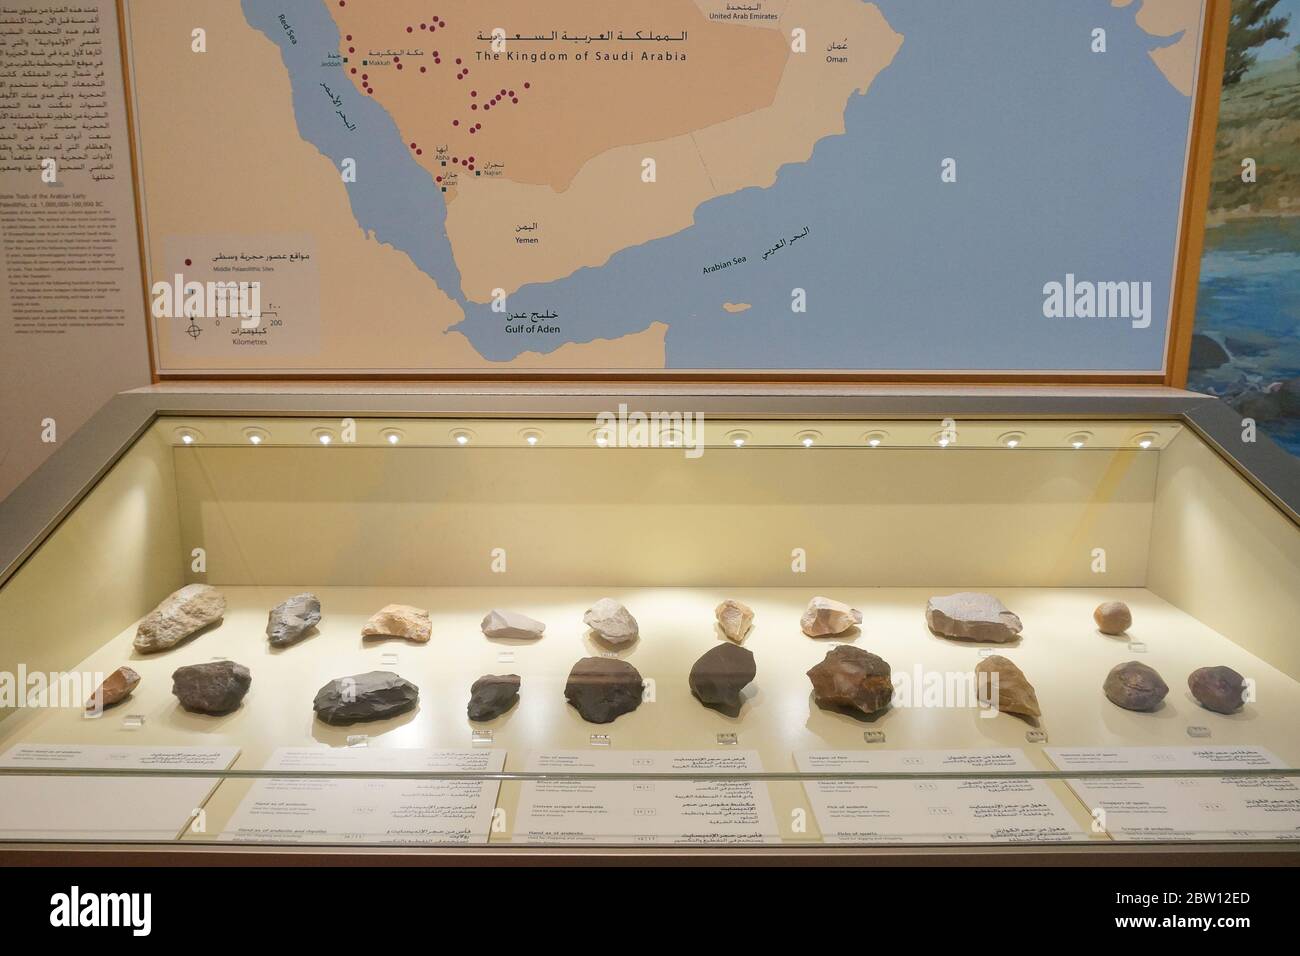 Ancient stone tools displayed at the National Museum in Riyadh, Kingdom of Saudi Arabia, Middle East. Photo taken on August 9, 2017. Stock Photo